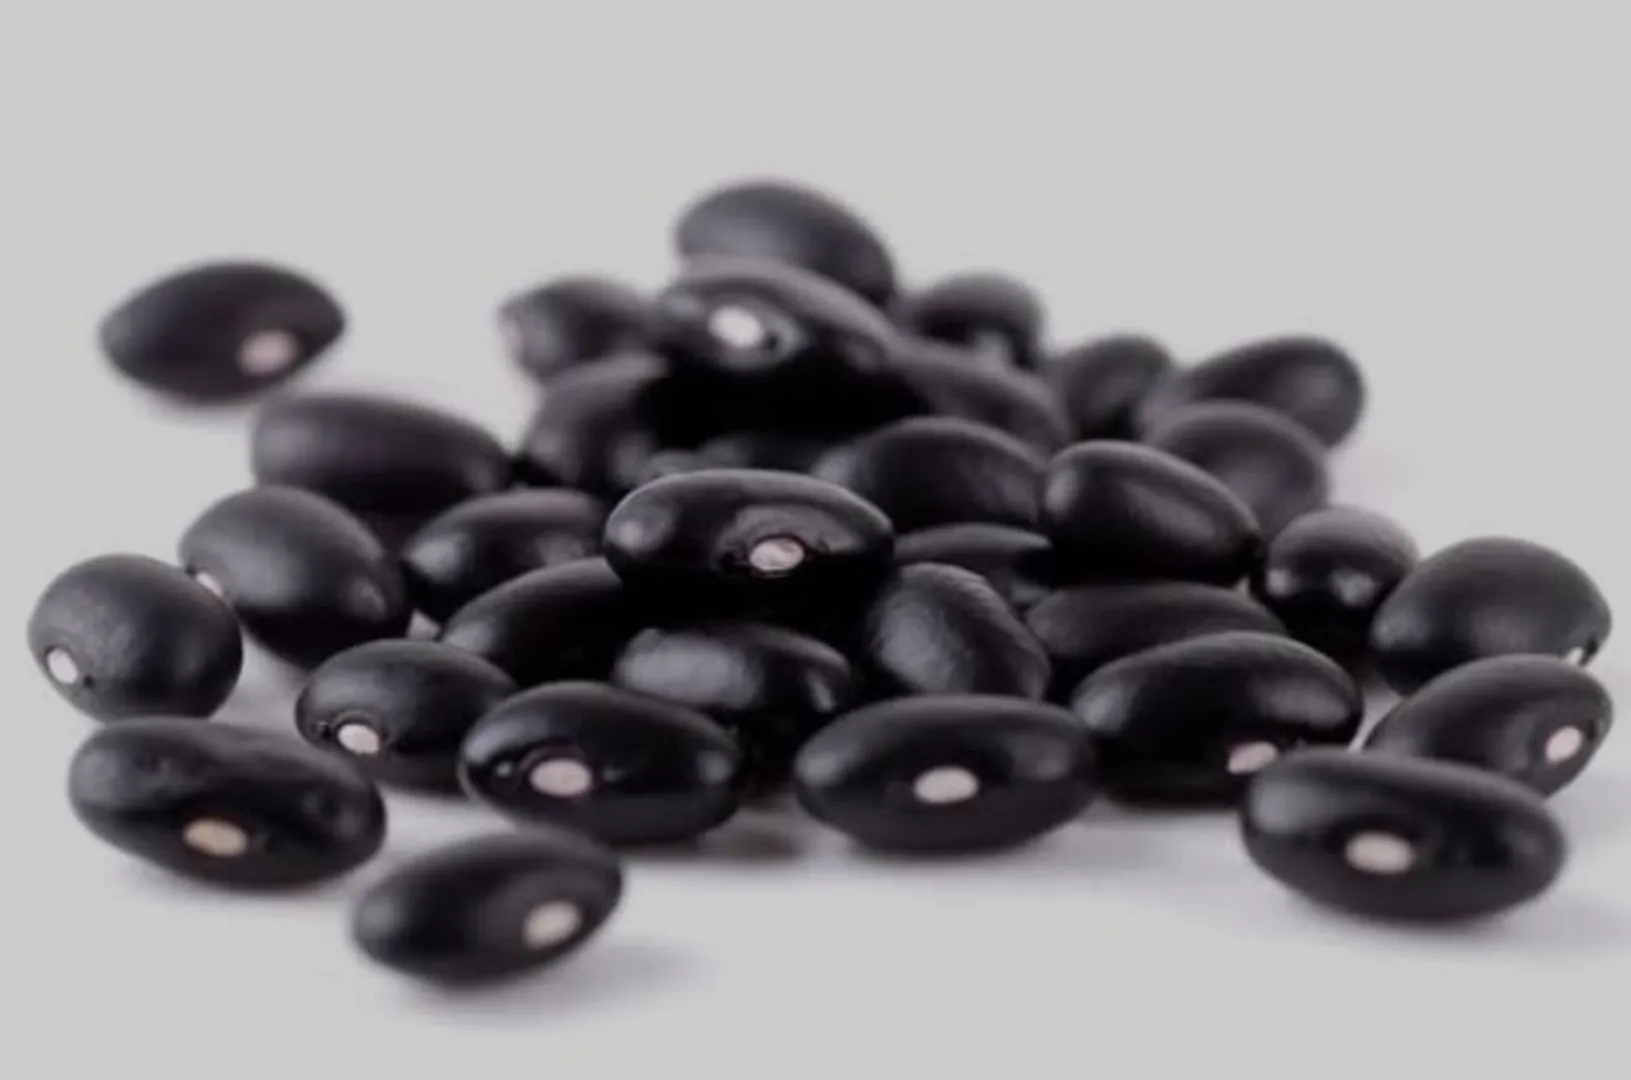 Black Beans: Packed with protein, fiber, and anthocyanins, black beans support heart health and provide antioxidant and anti-inflammatory benefits.